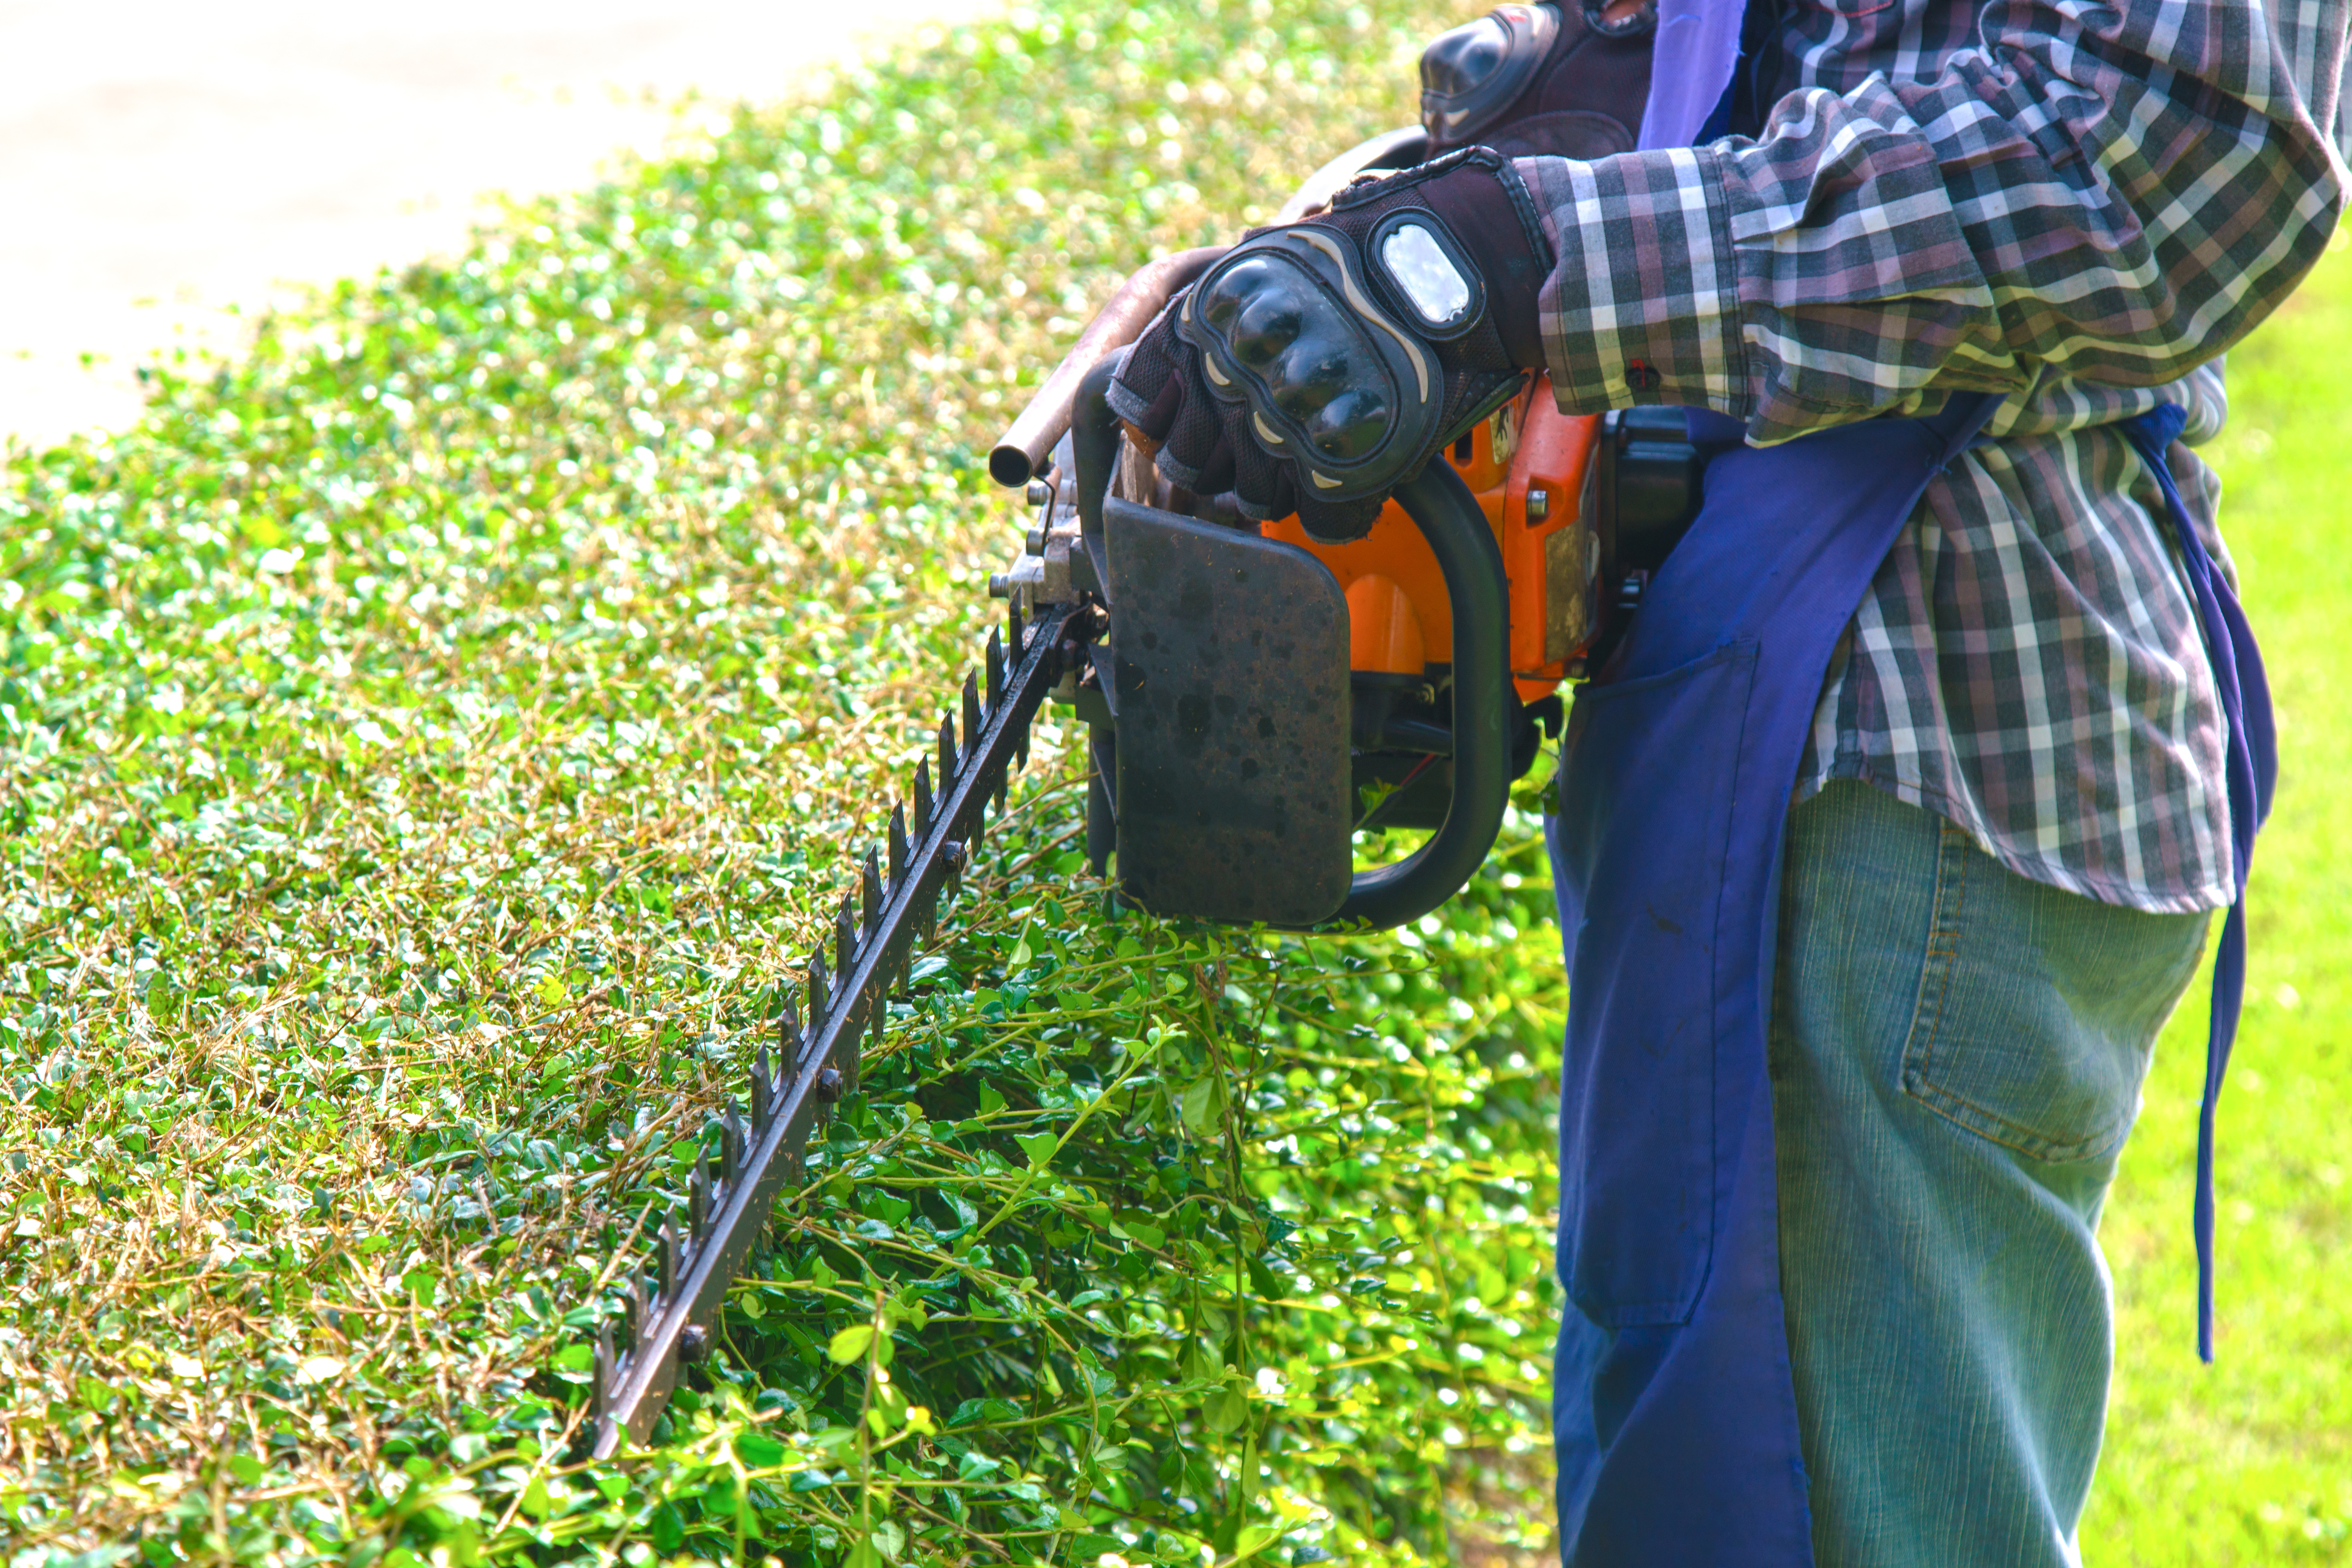 Pictured is a person working in the lawn. SHUTTERSTOCK/ sukanya sitthikongsak